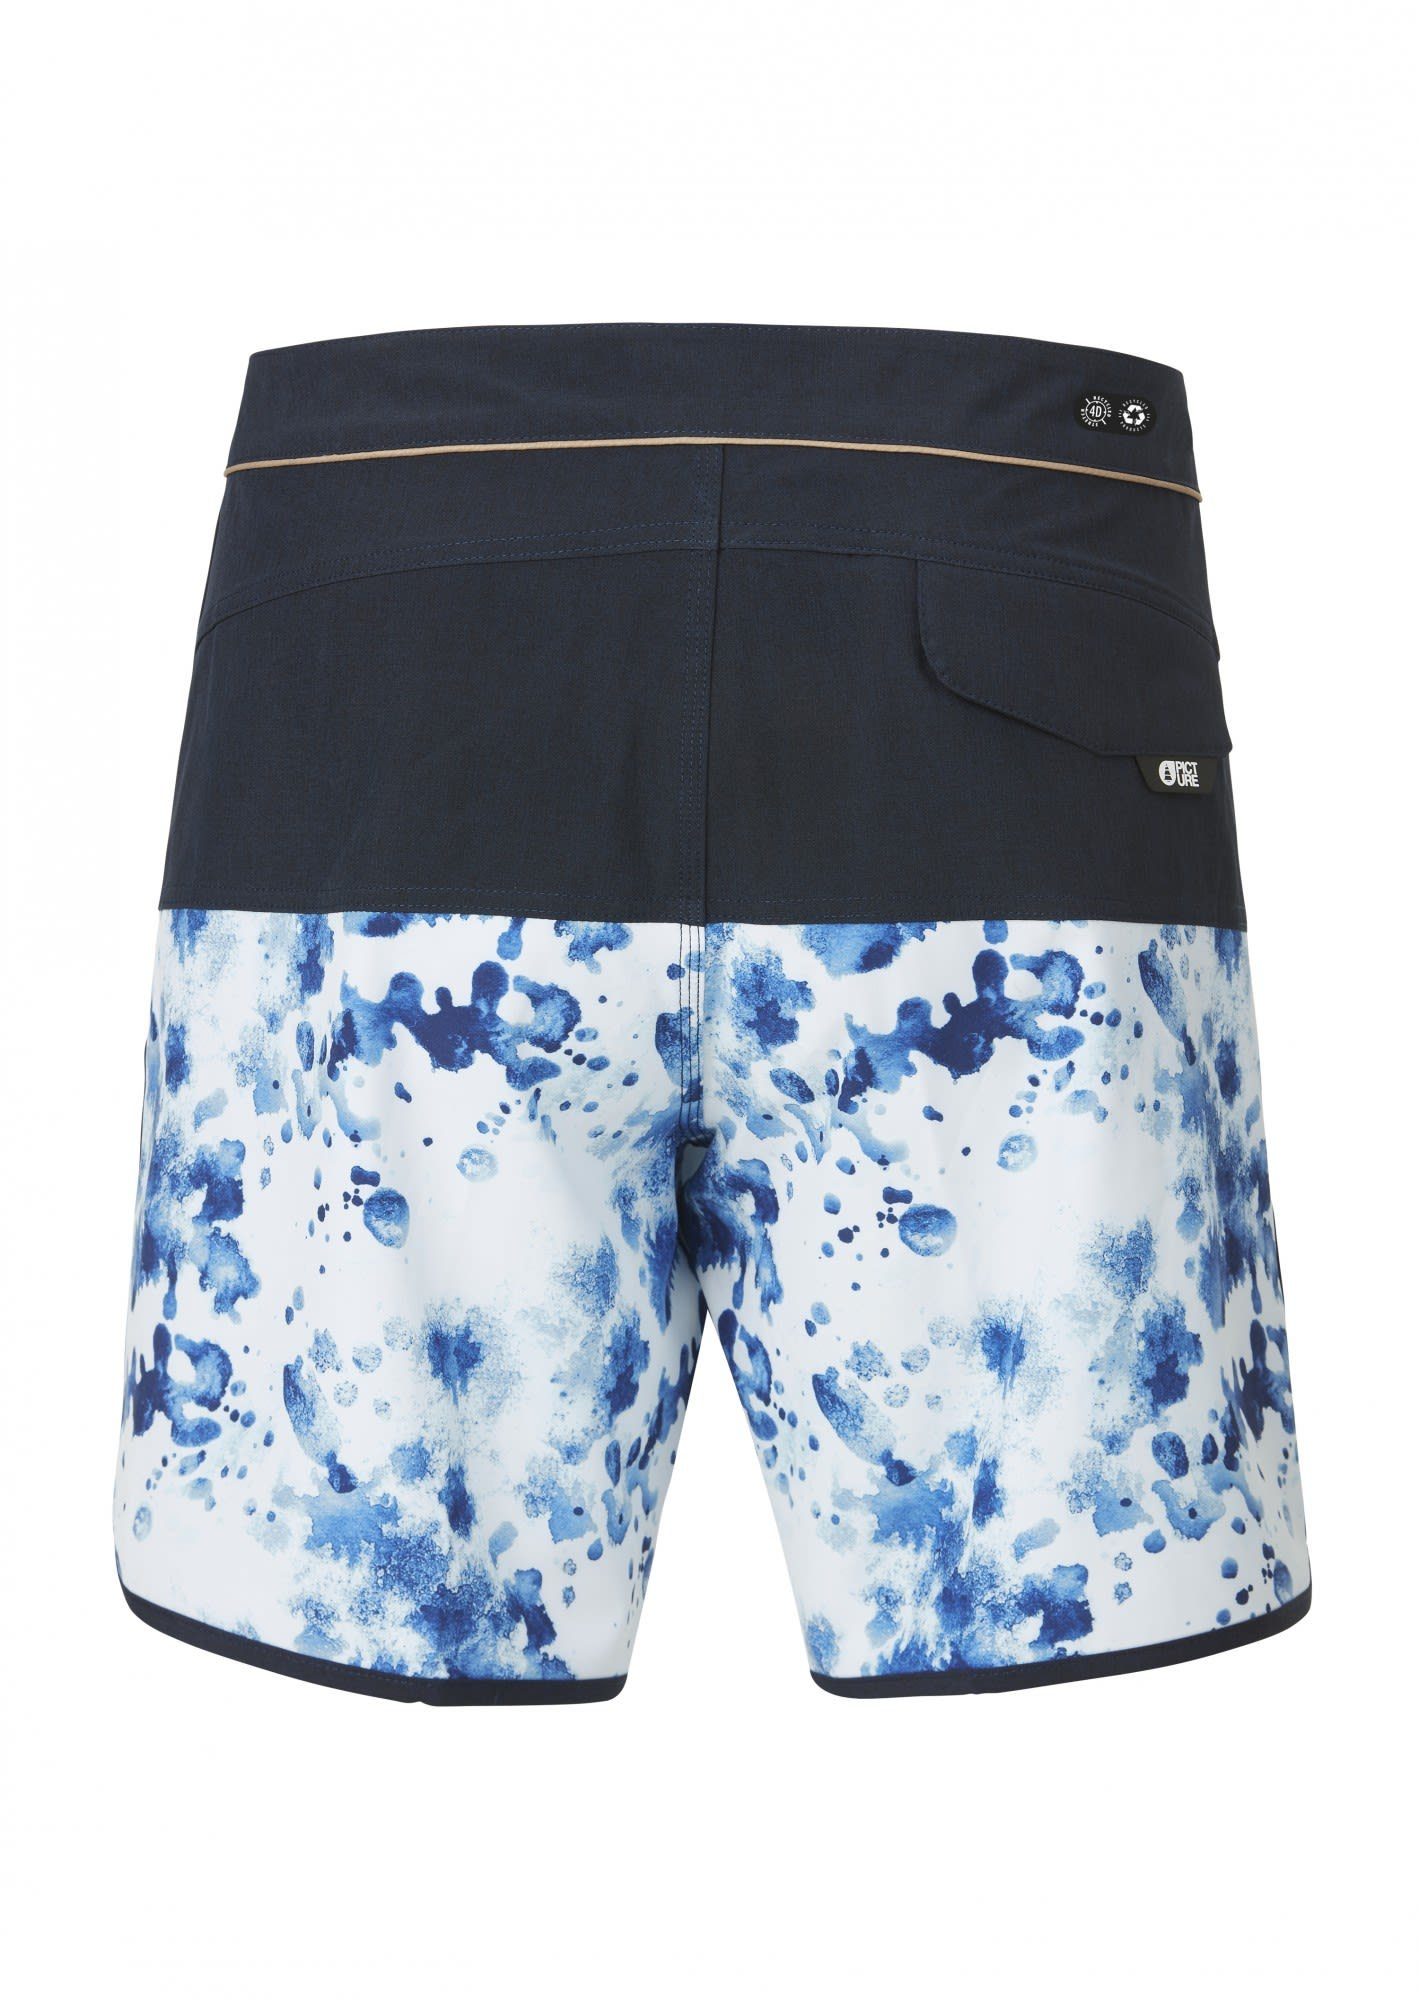 Picture Strandshorts Picture 17 Andy Ocean Herren M Boardshorts Shorts